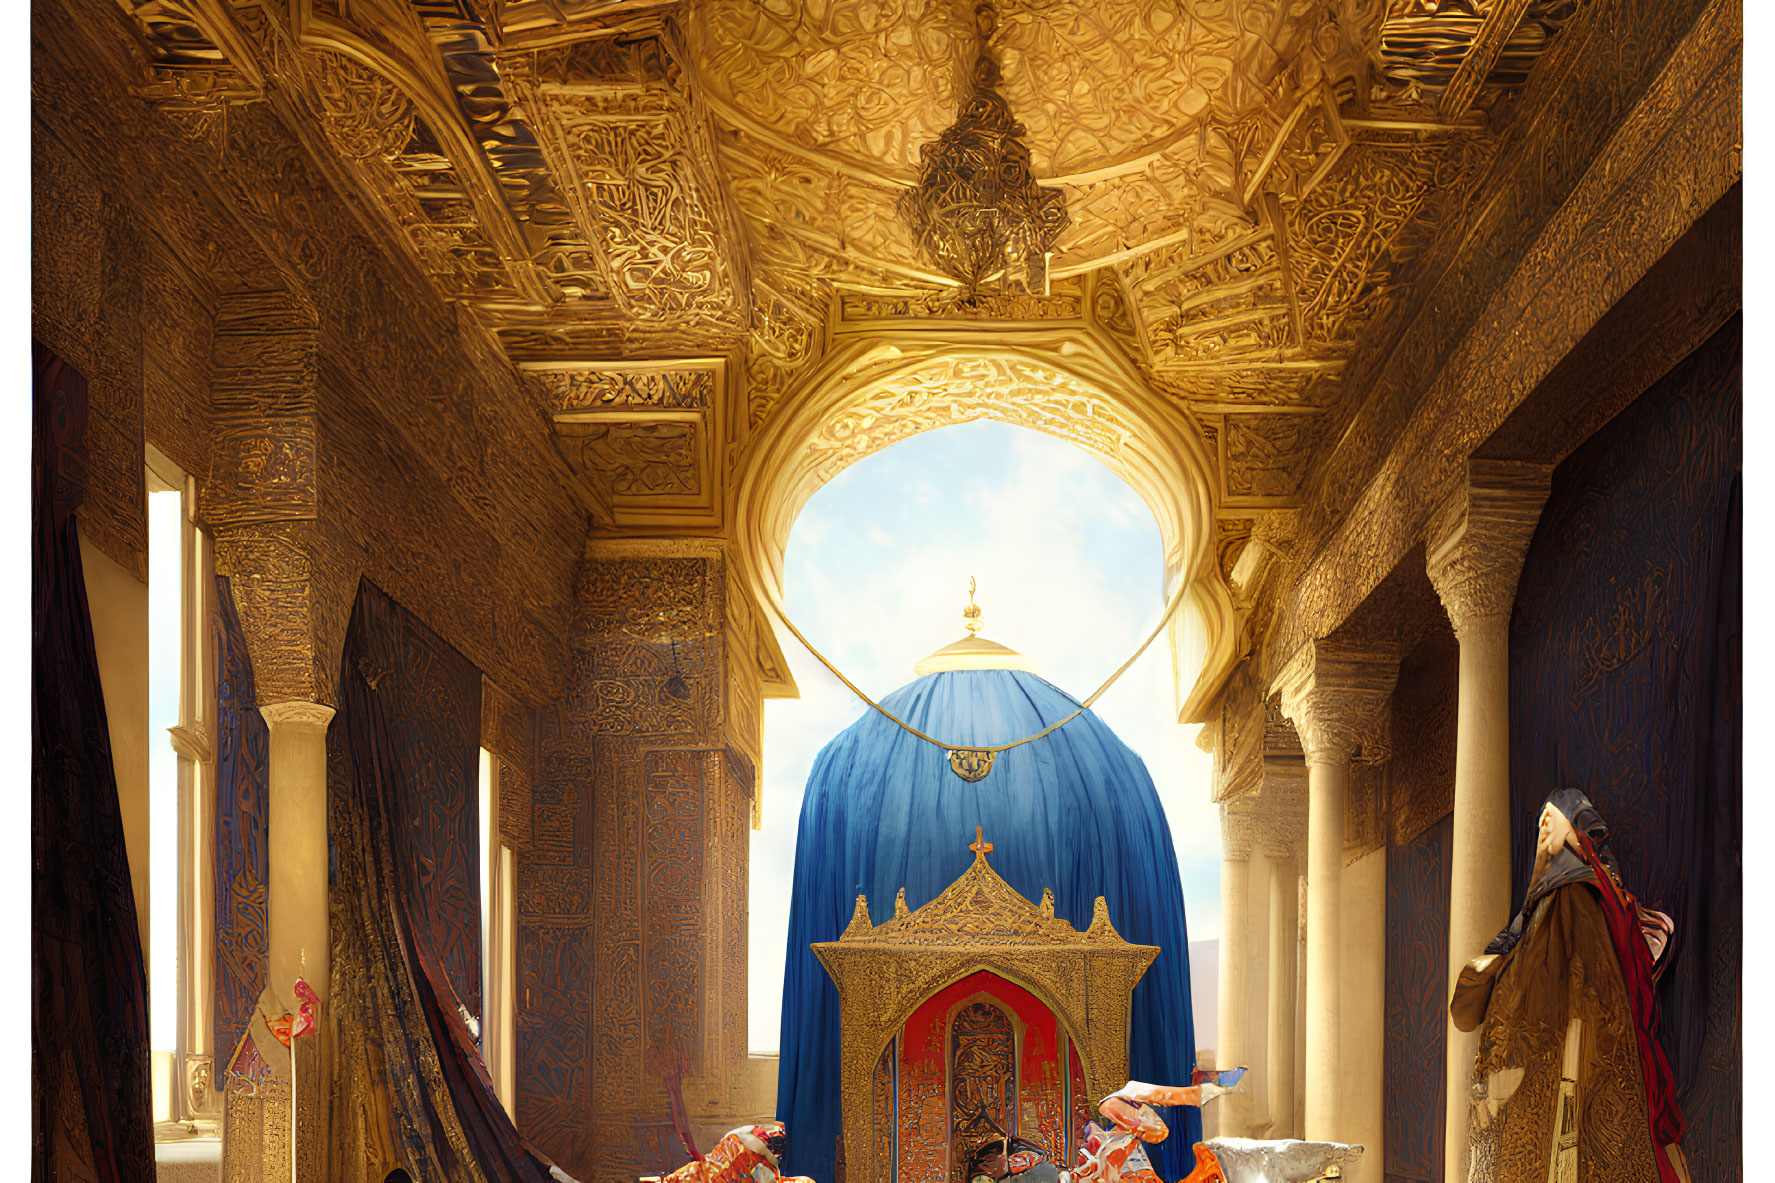 Opulent palace chamber with golden ornate ceilings and figures in traditional attire